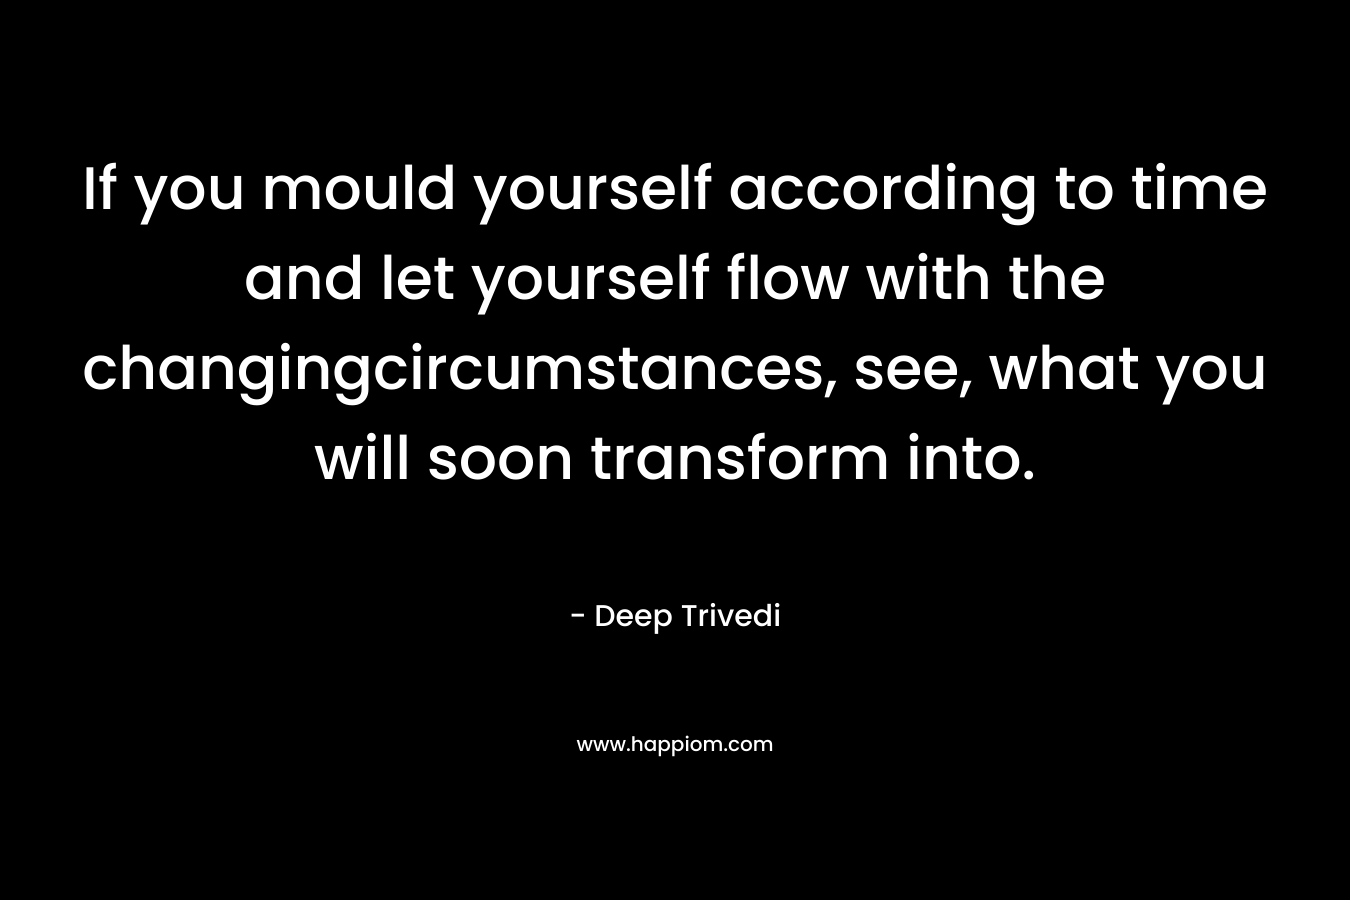 If you mould yourself according to time and let yourself flow with the changingcircumstances, see, what you will soon transform into. – Deep Trivedi